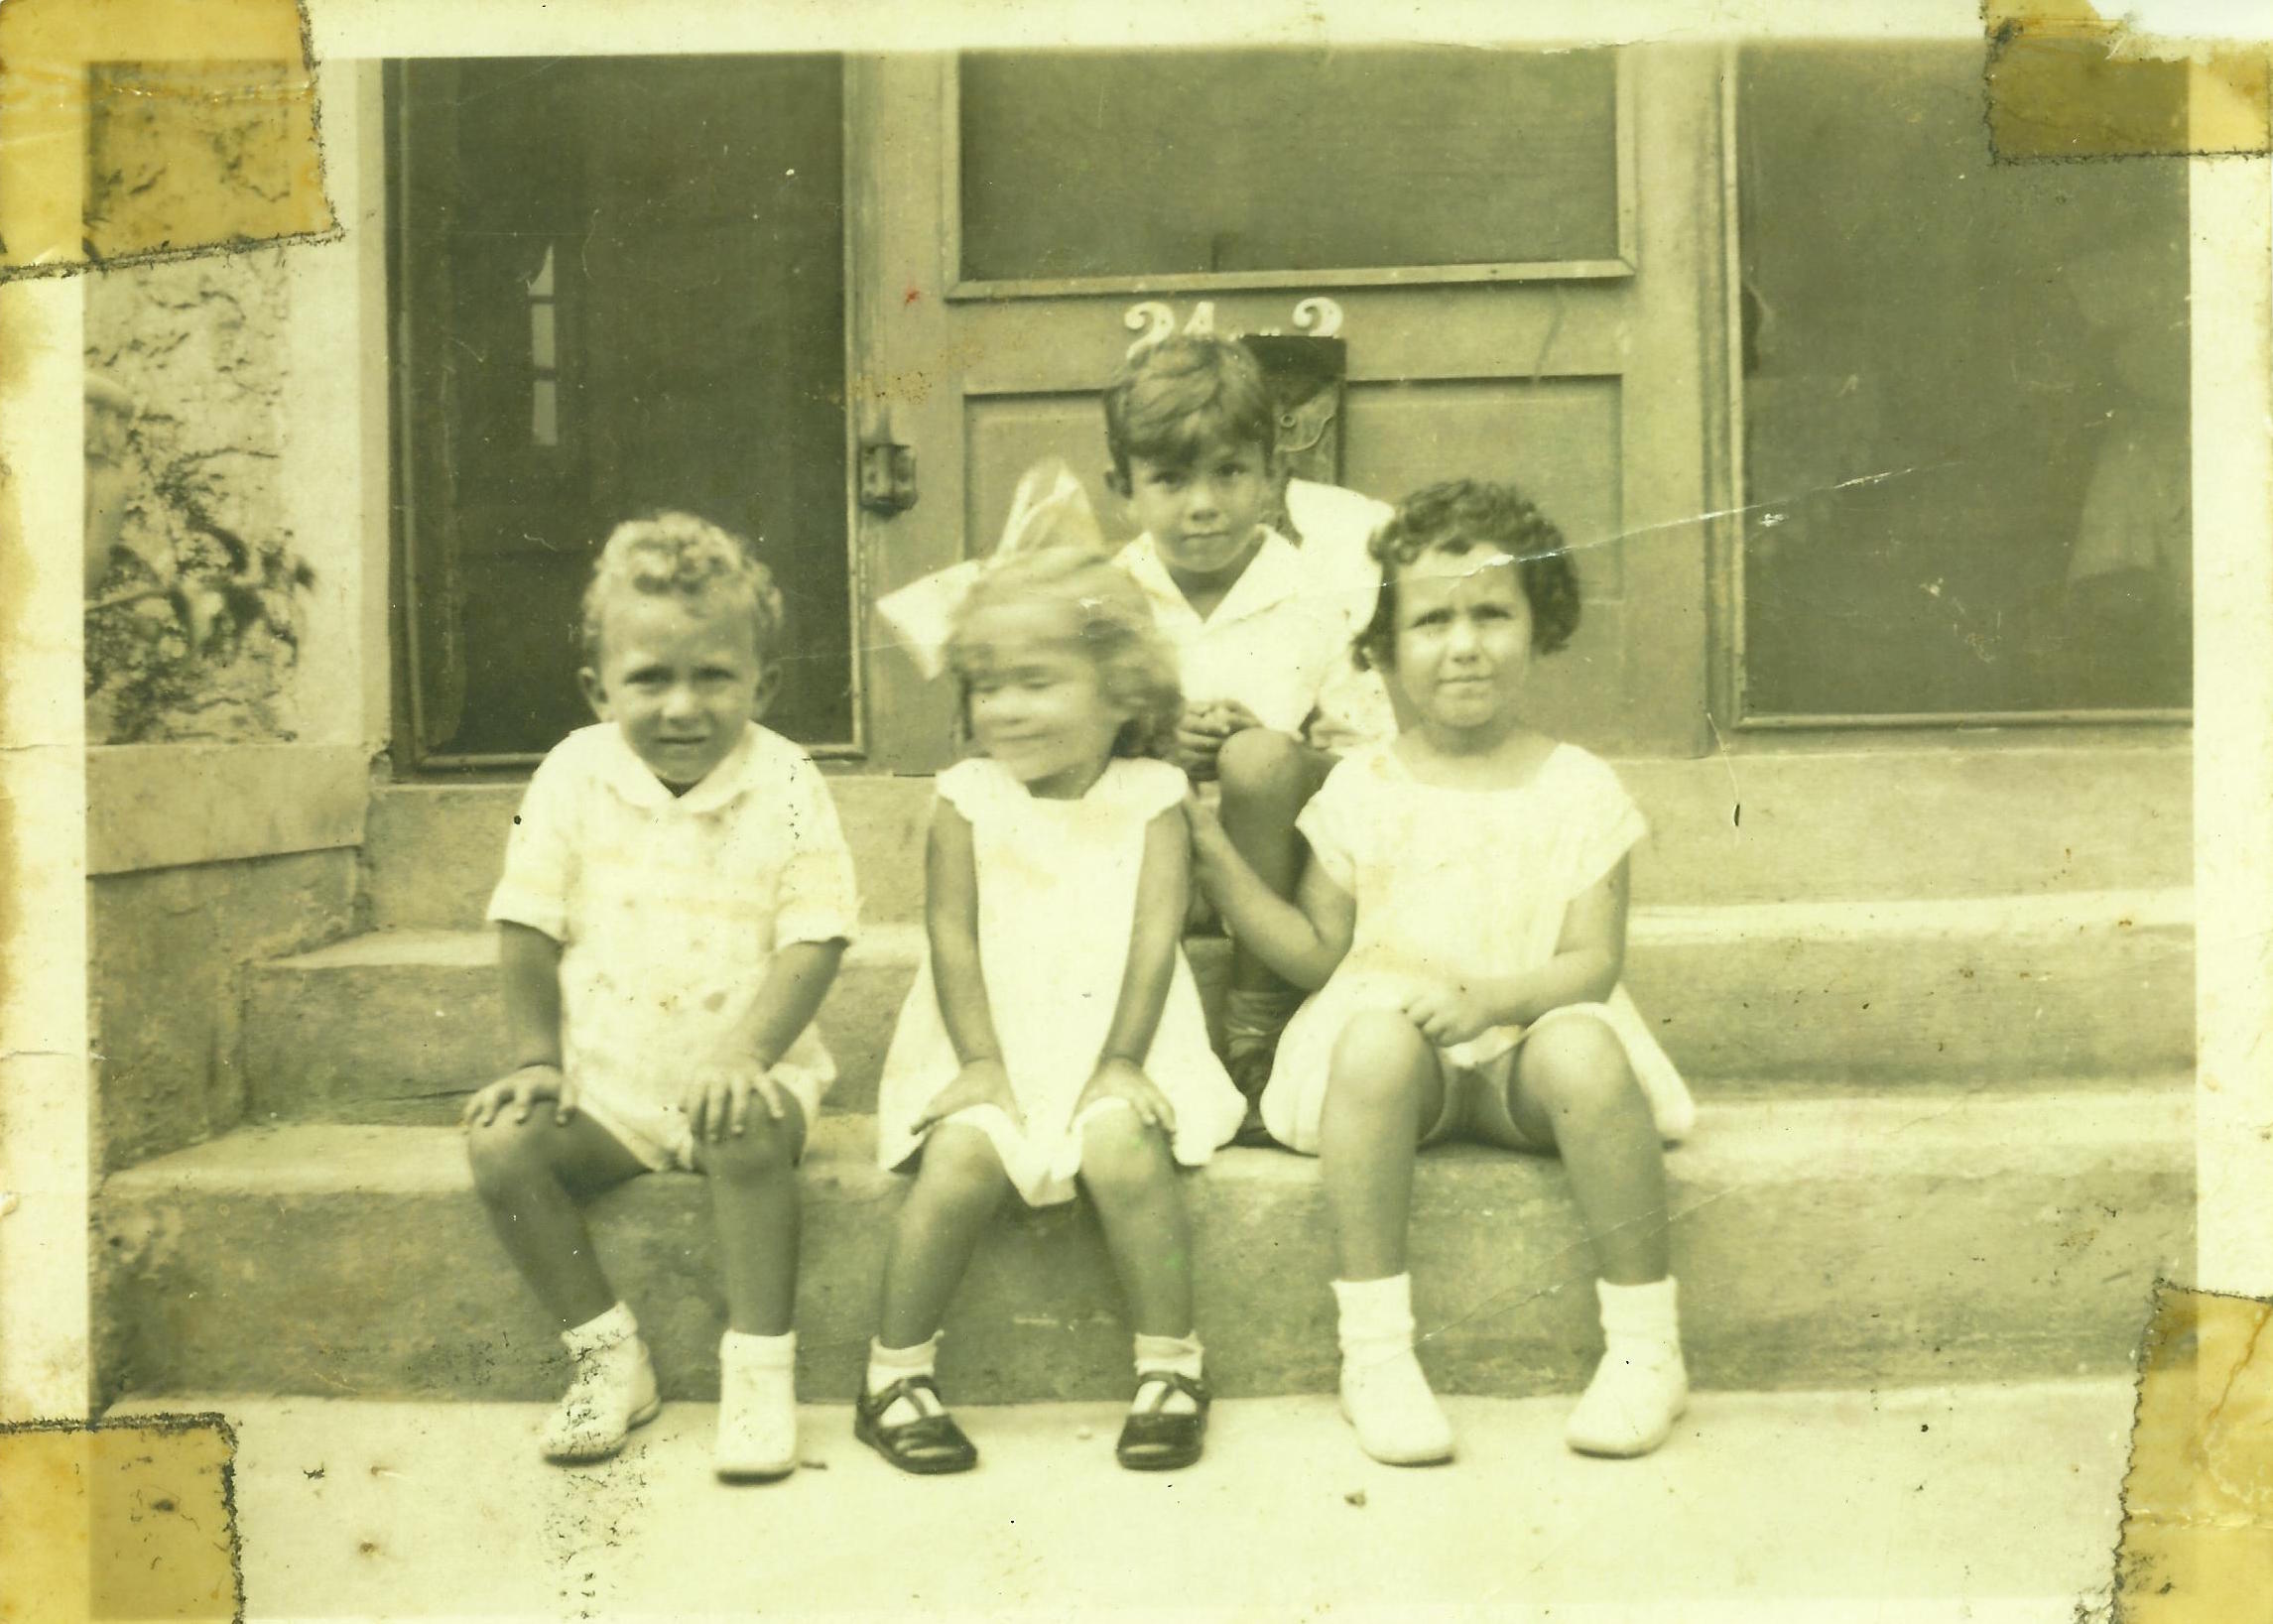 A black and white photo of four small children sitting on the steps of a building, three girls and one boy.